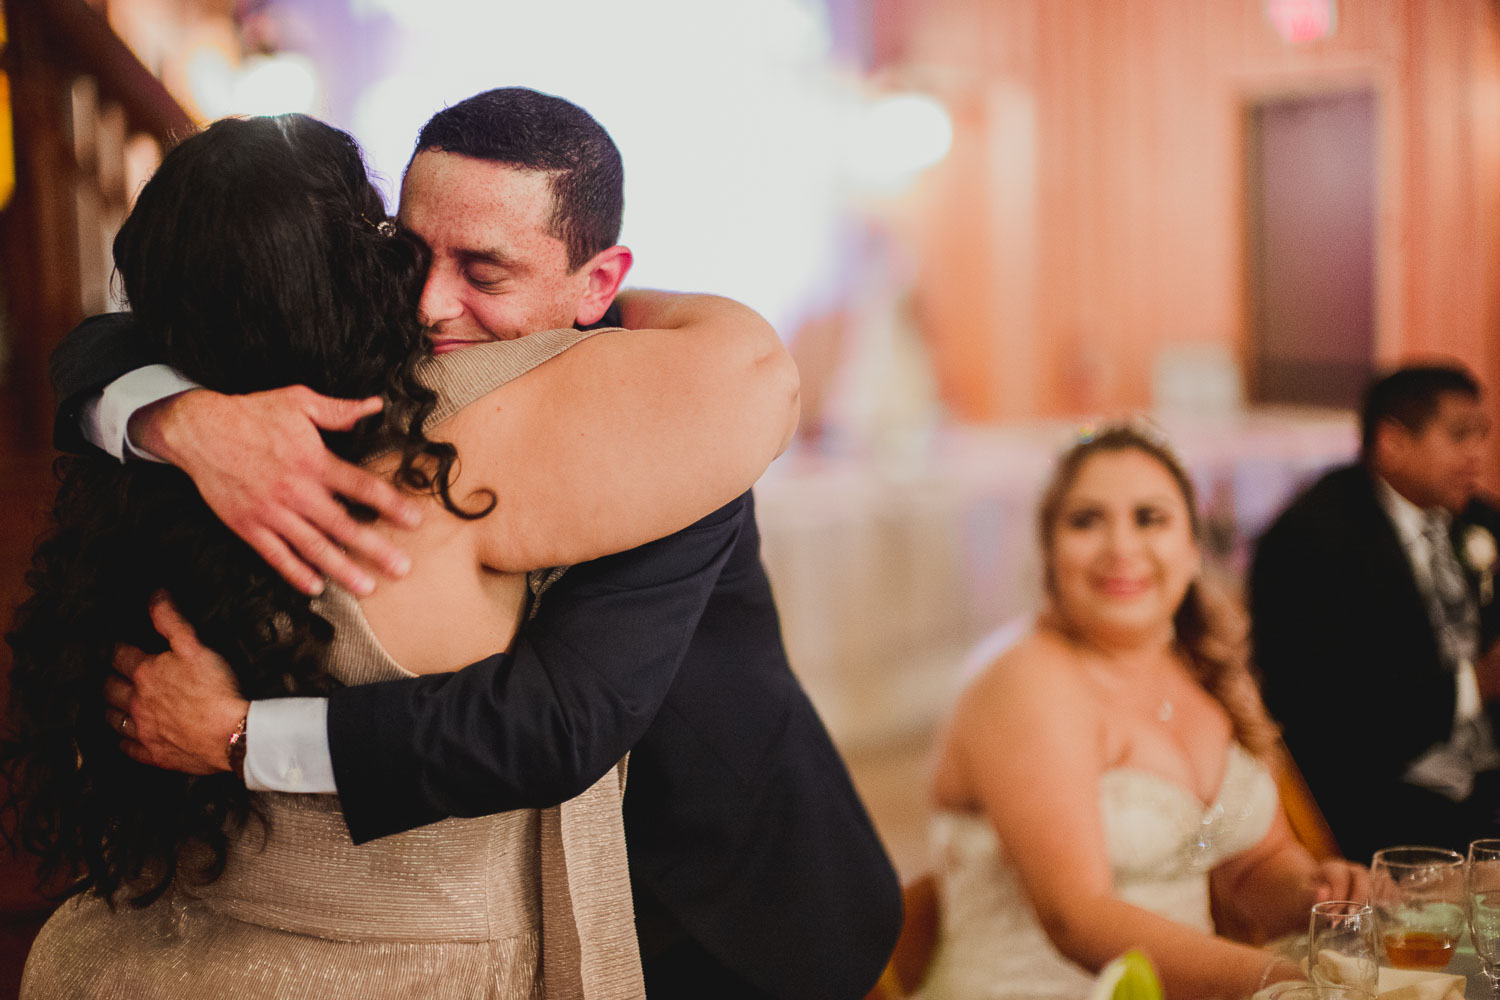 Eric the groom hugs his mother in law after an emotional speech with the bride looking on at The Springs Event Venue Wedding Photos-Philip Thomas